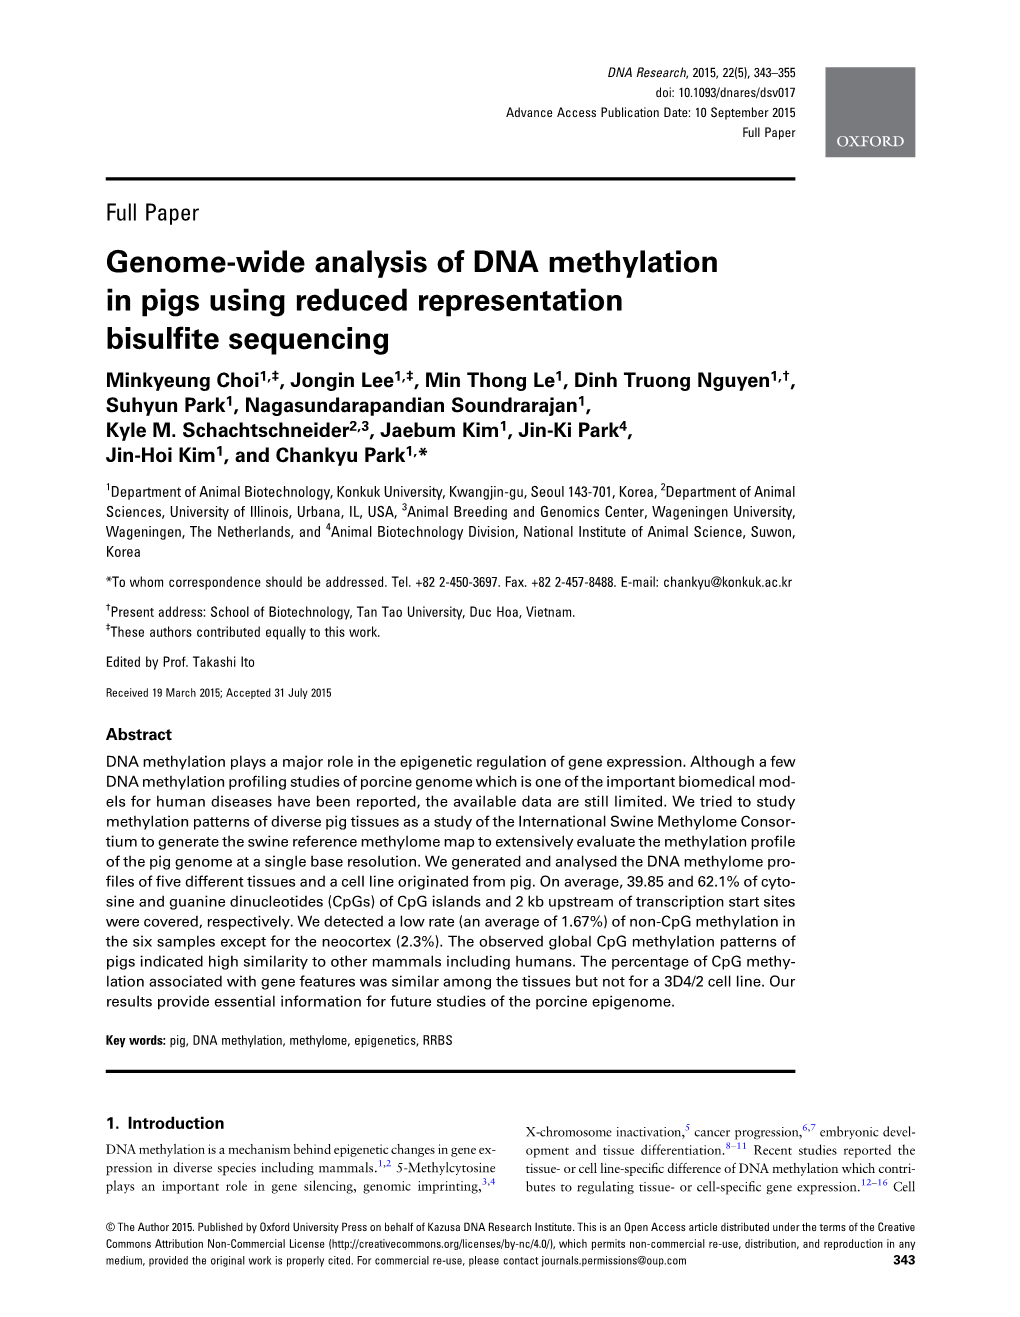 Genome-Wide Analysis of DNA Methylation in Pigs Using Reduced Representation Bisulfite Sequencing